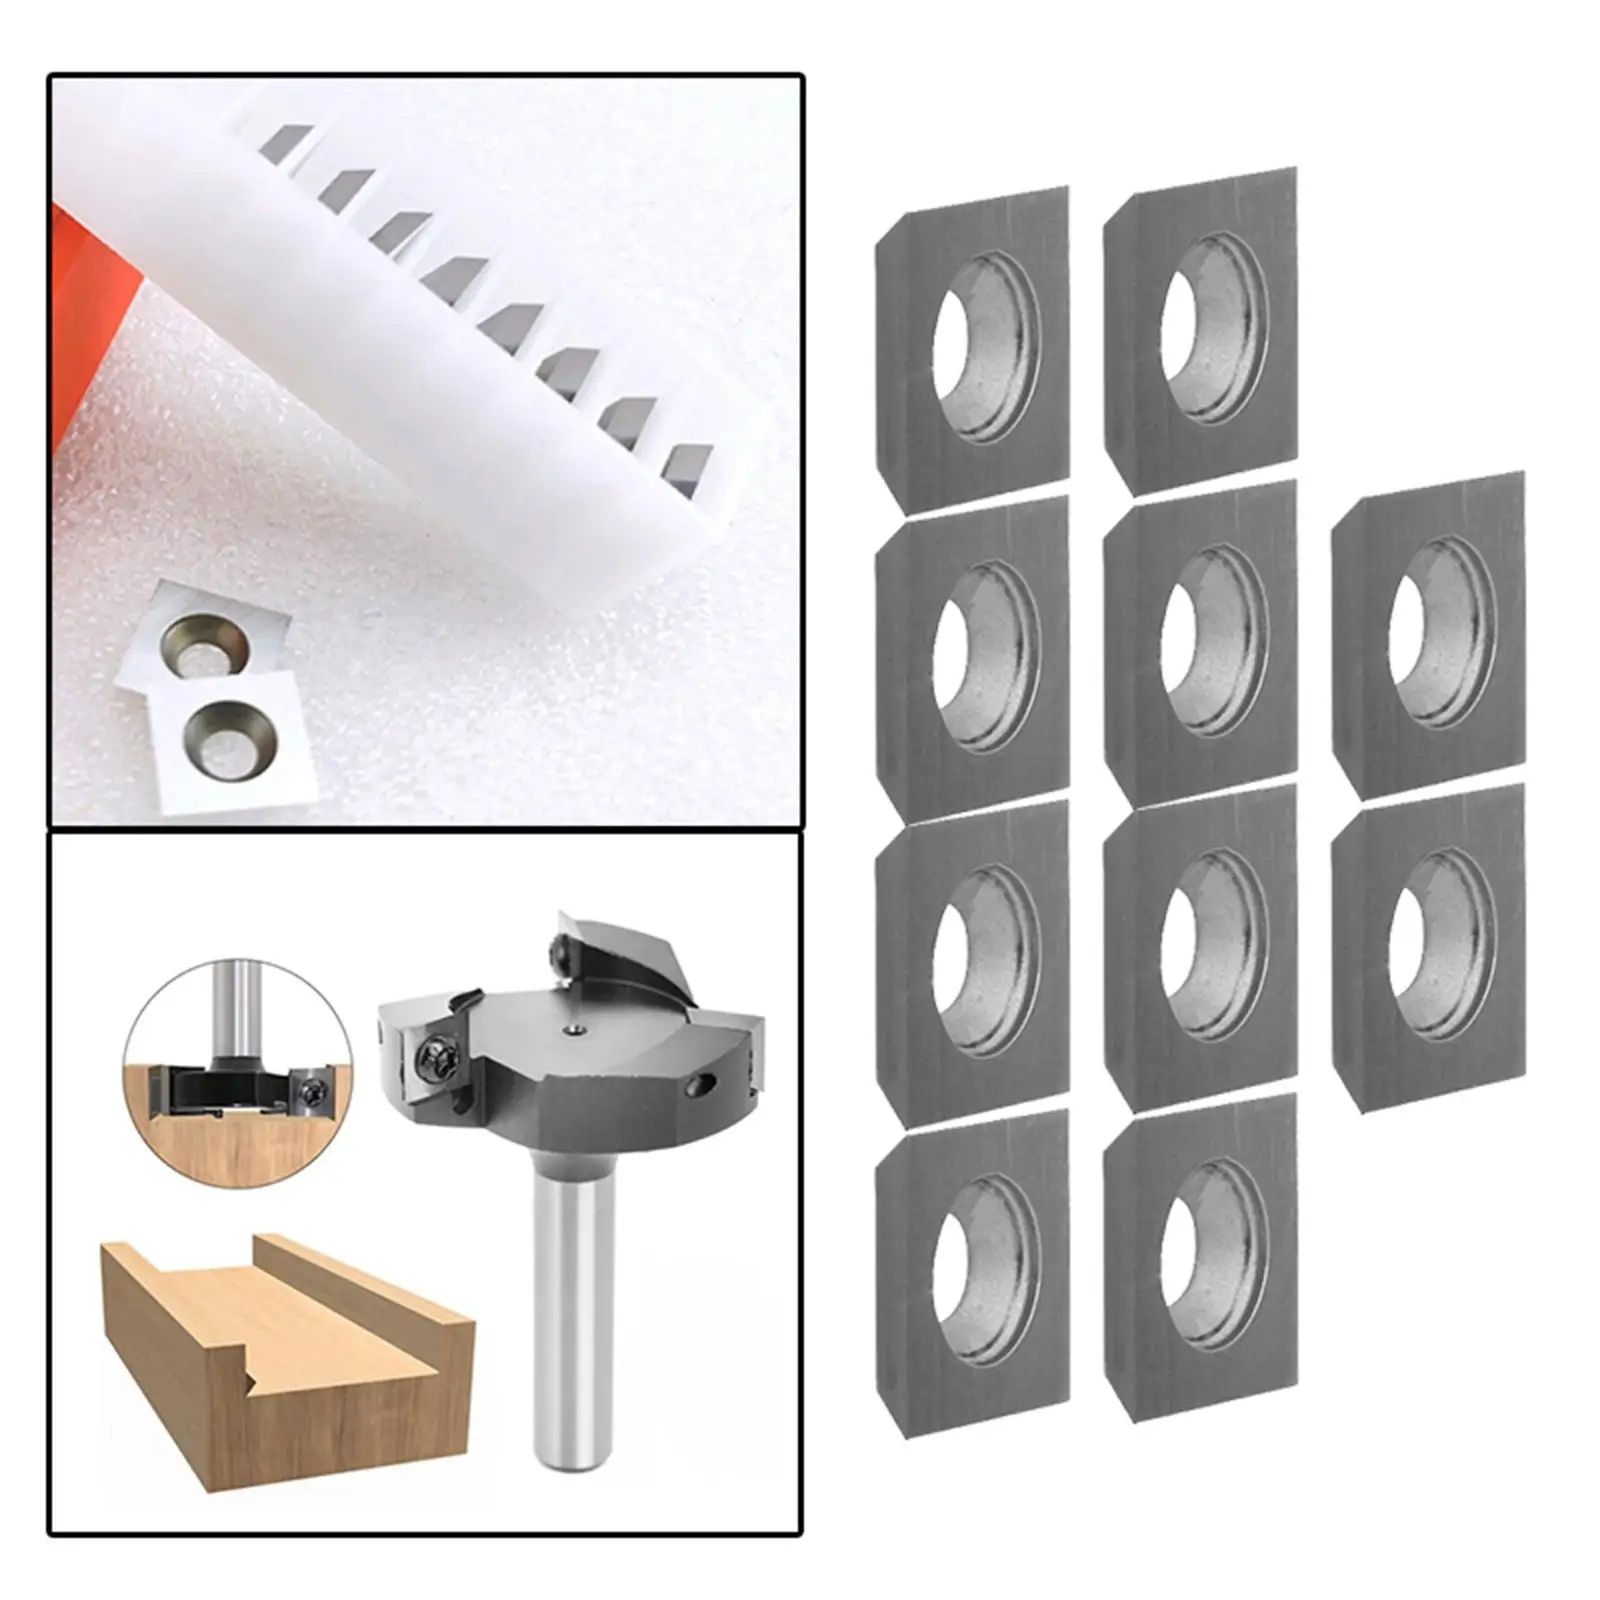 10 Pcs Set Square Lathe Turning Tools High Strength Replacement Insert Cutter Head for Woodworking Milling